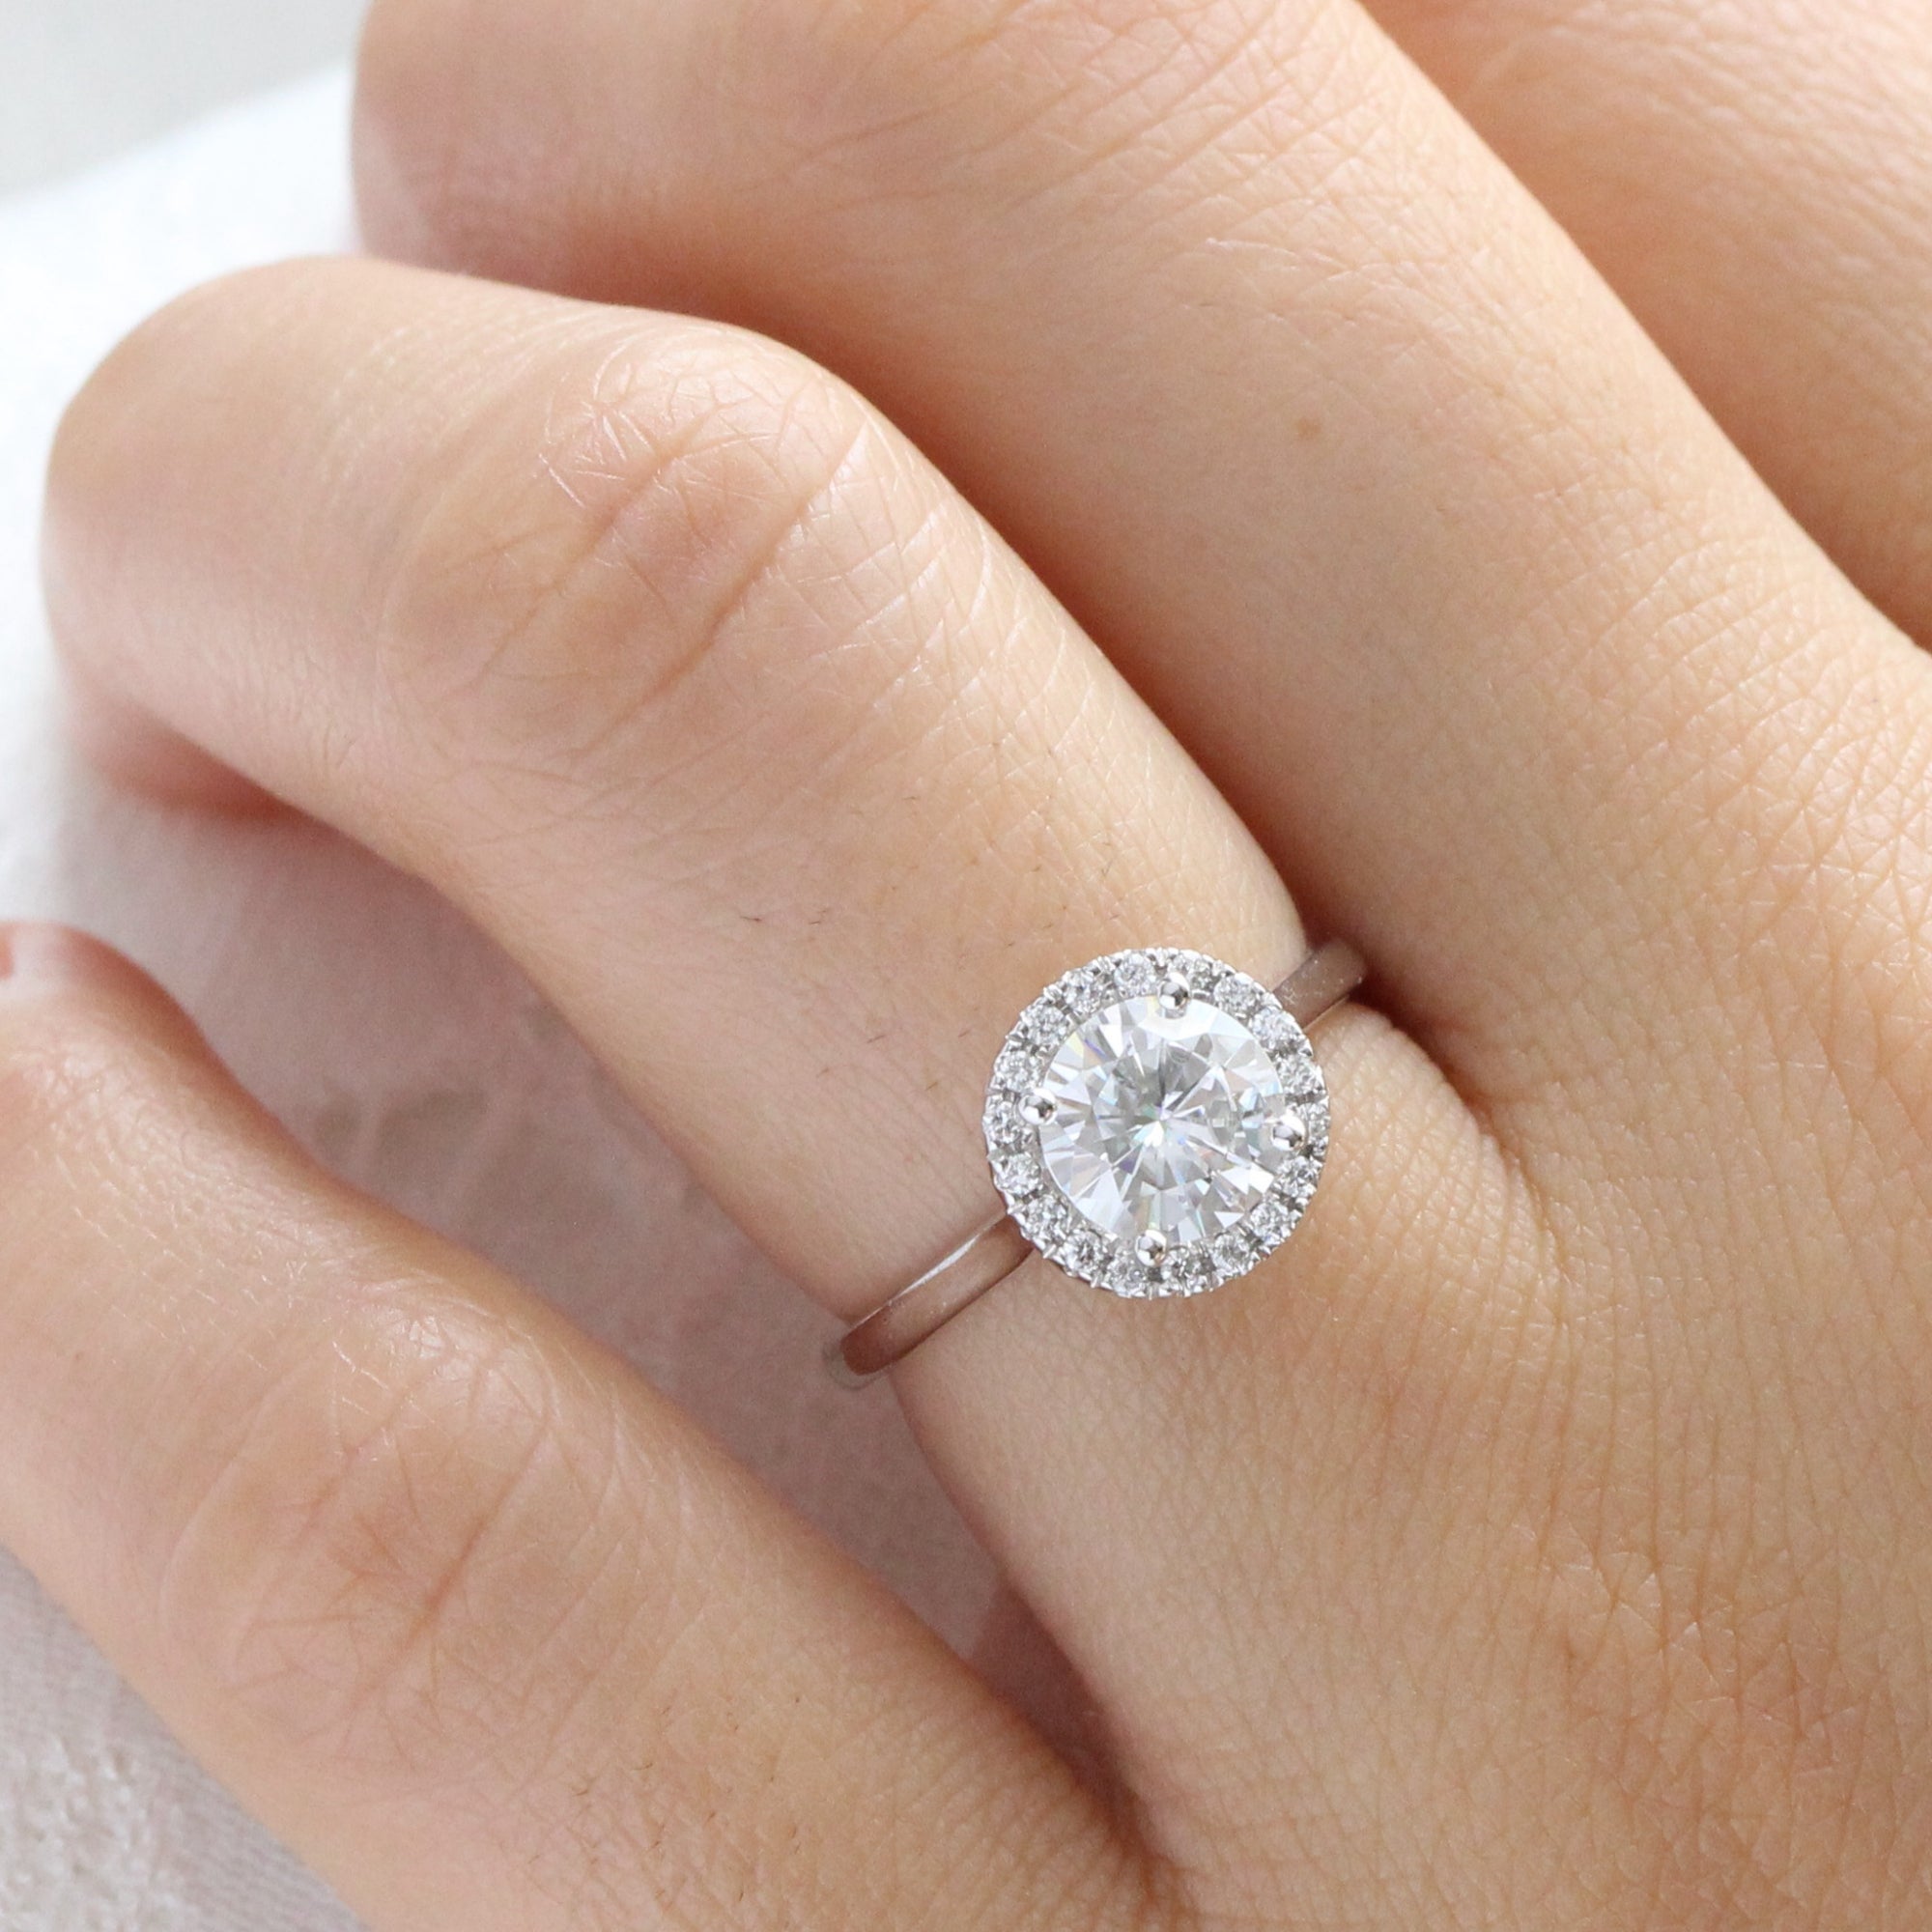 Luna Halo Round Engagement Ring w/ Moissanite and Diamond in Plain Band